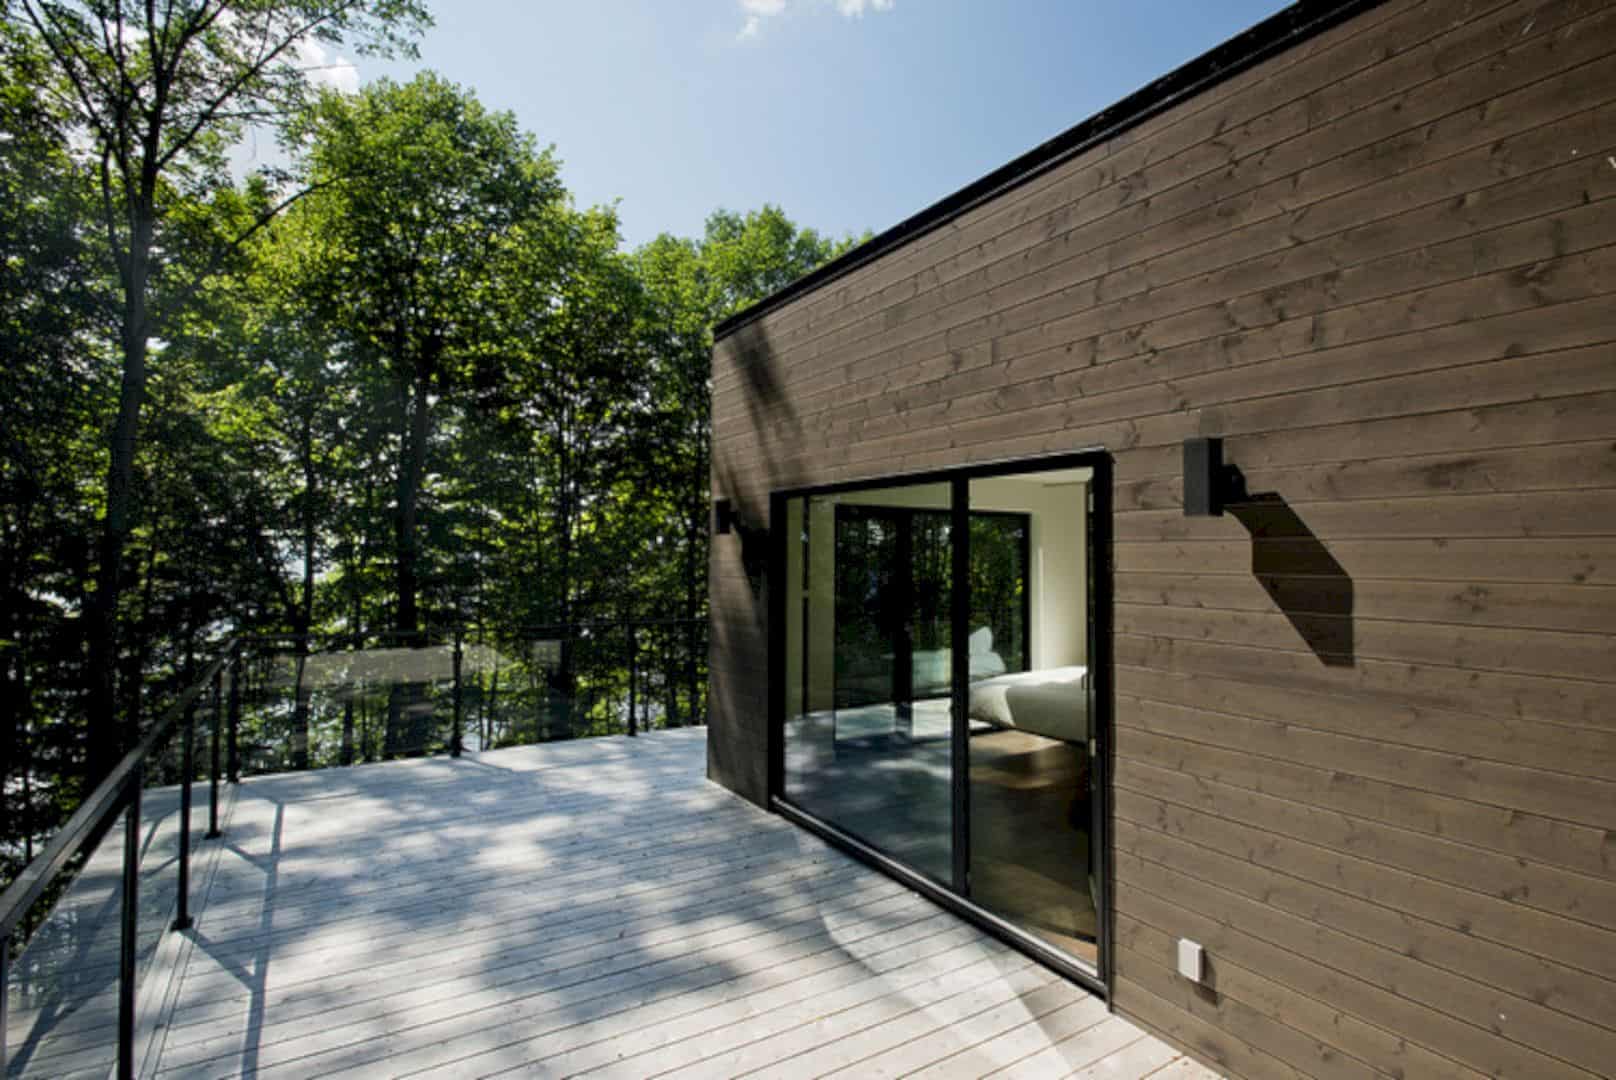 Chalet Lac Champlain A Contemporary Cottage Acting As Observation Post On Natural Settings 6